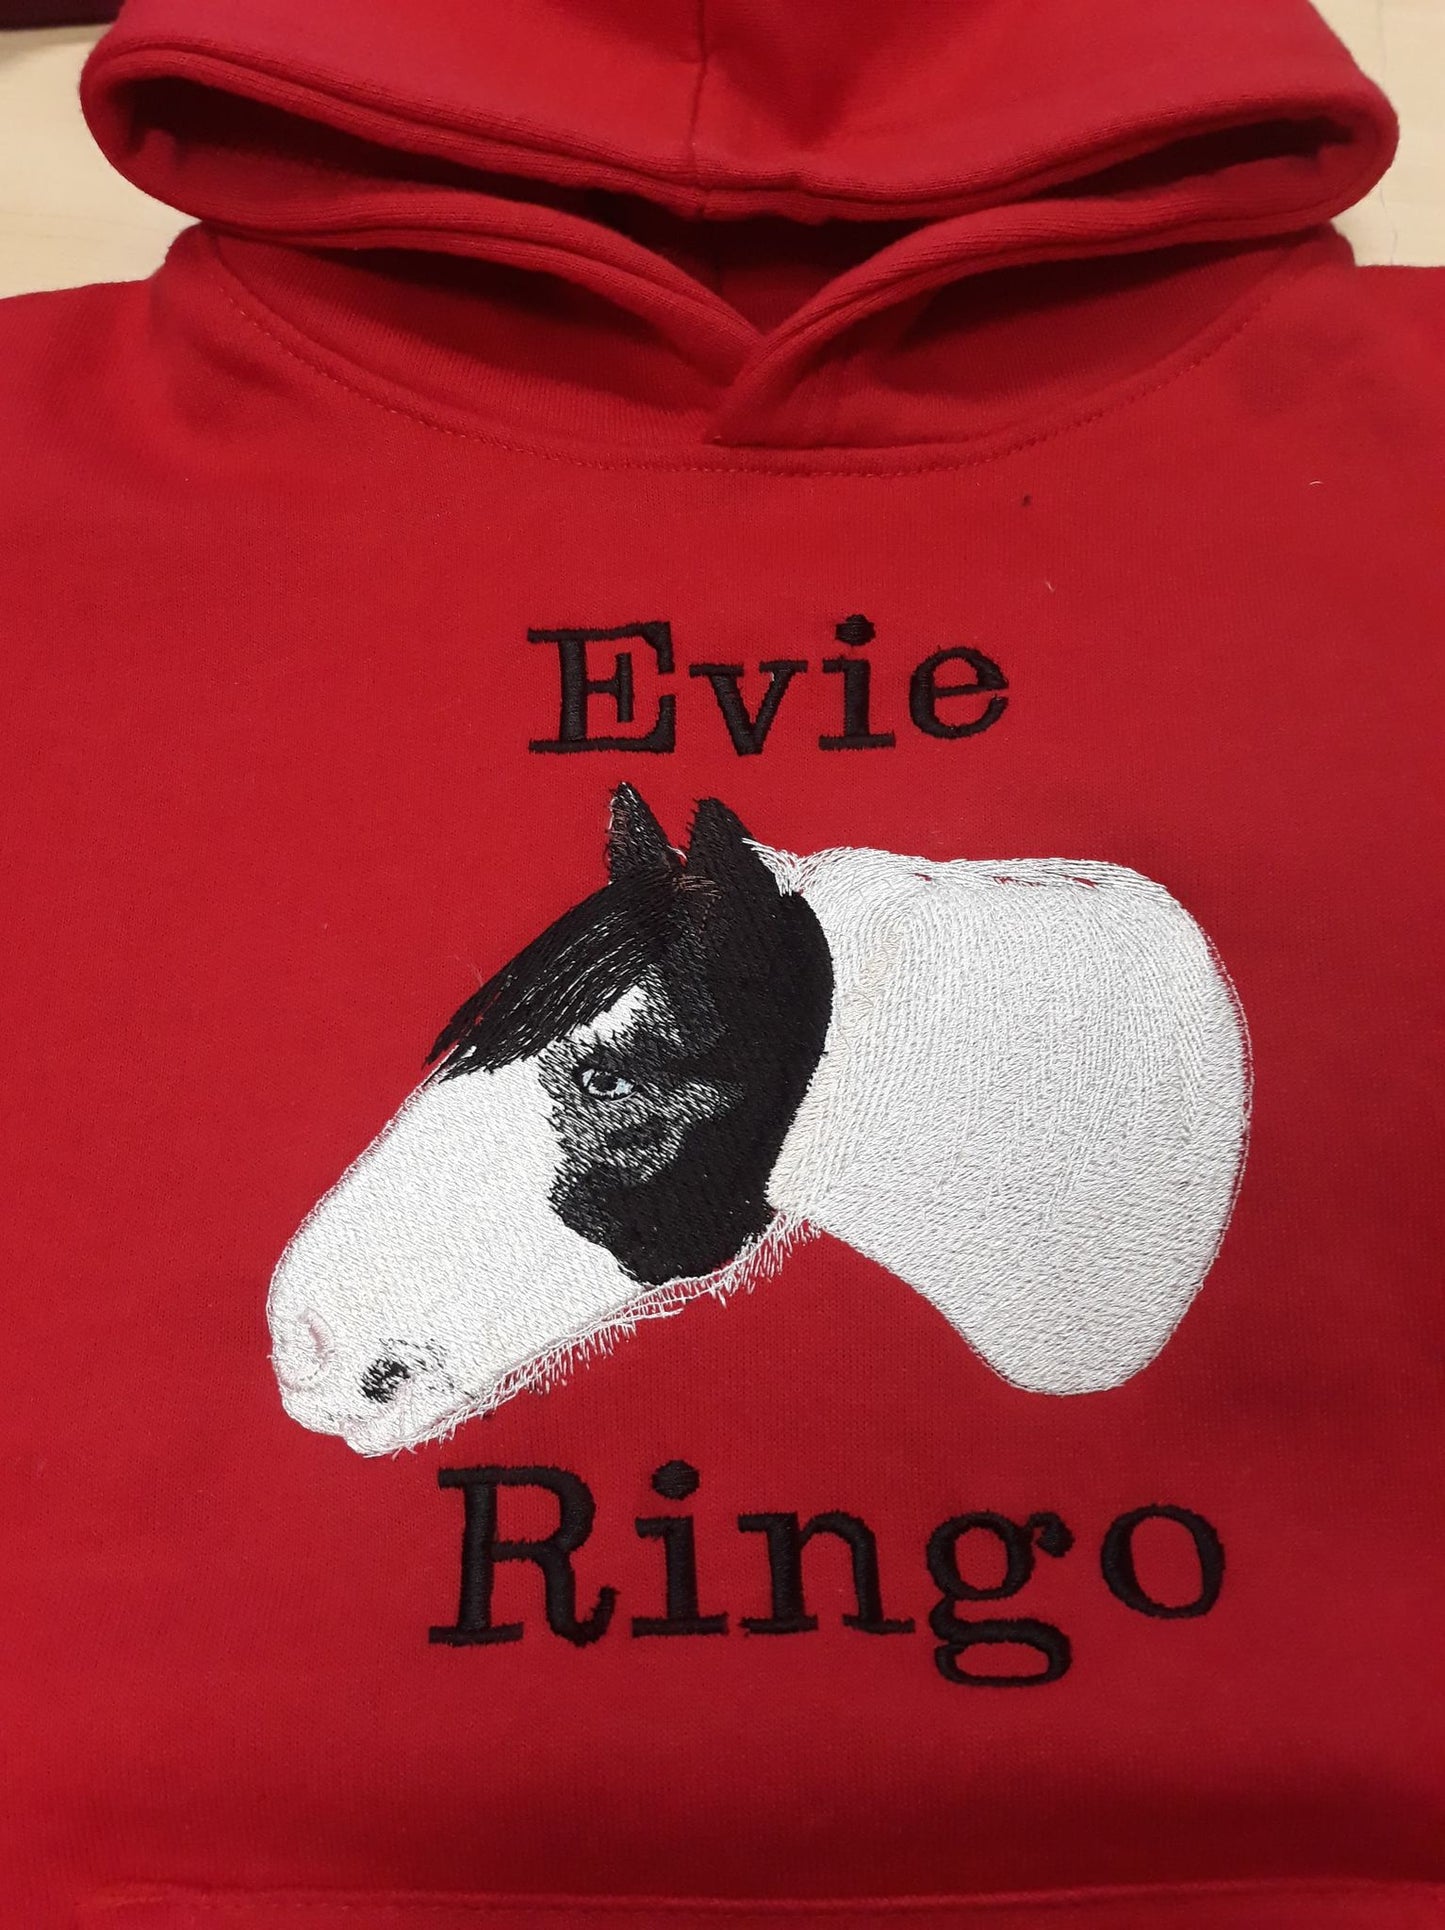 Crafted from Sustainable materials Horse hoodie (kids), horse photo embroidery